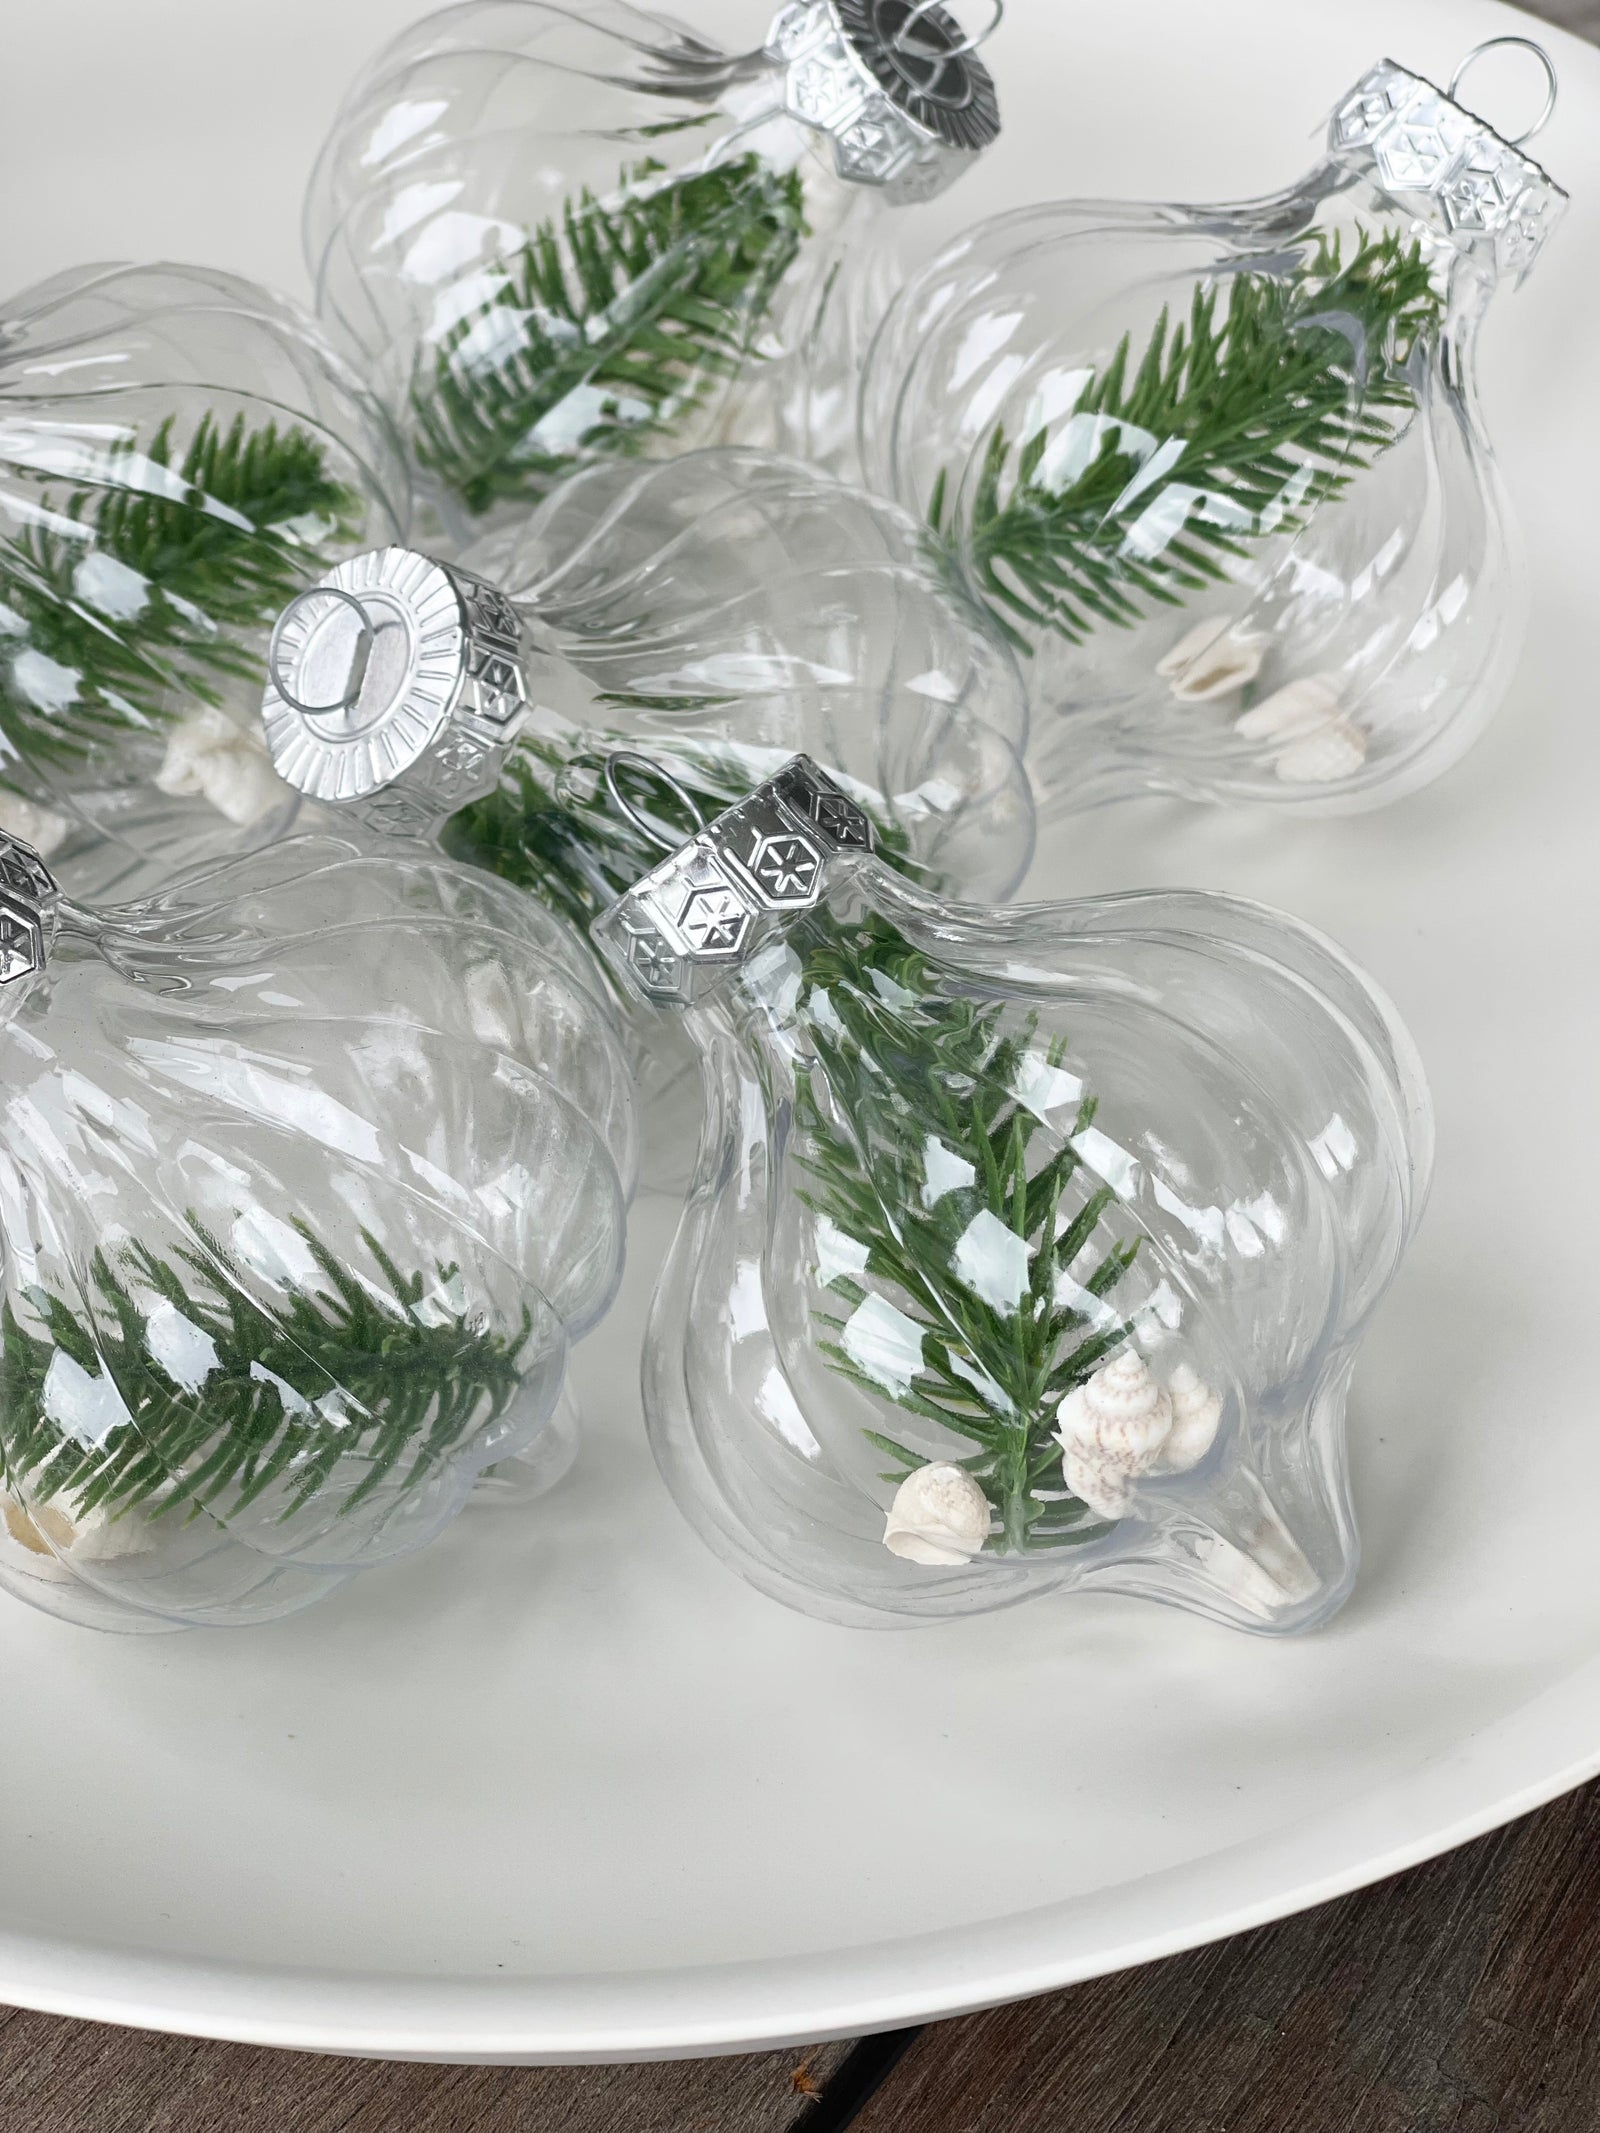 chrissy shell onion baubles